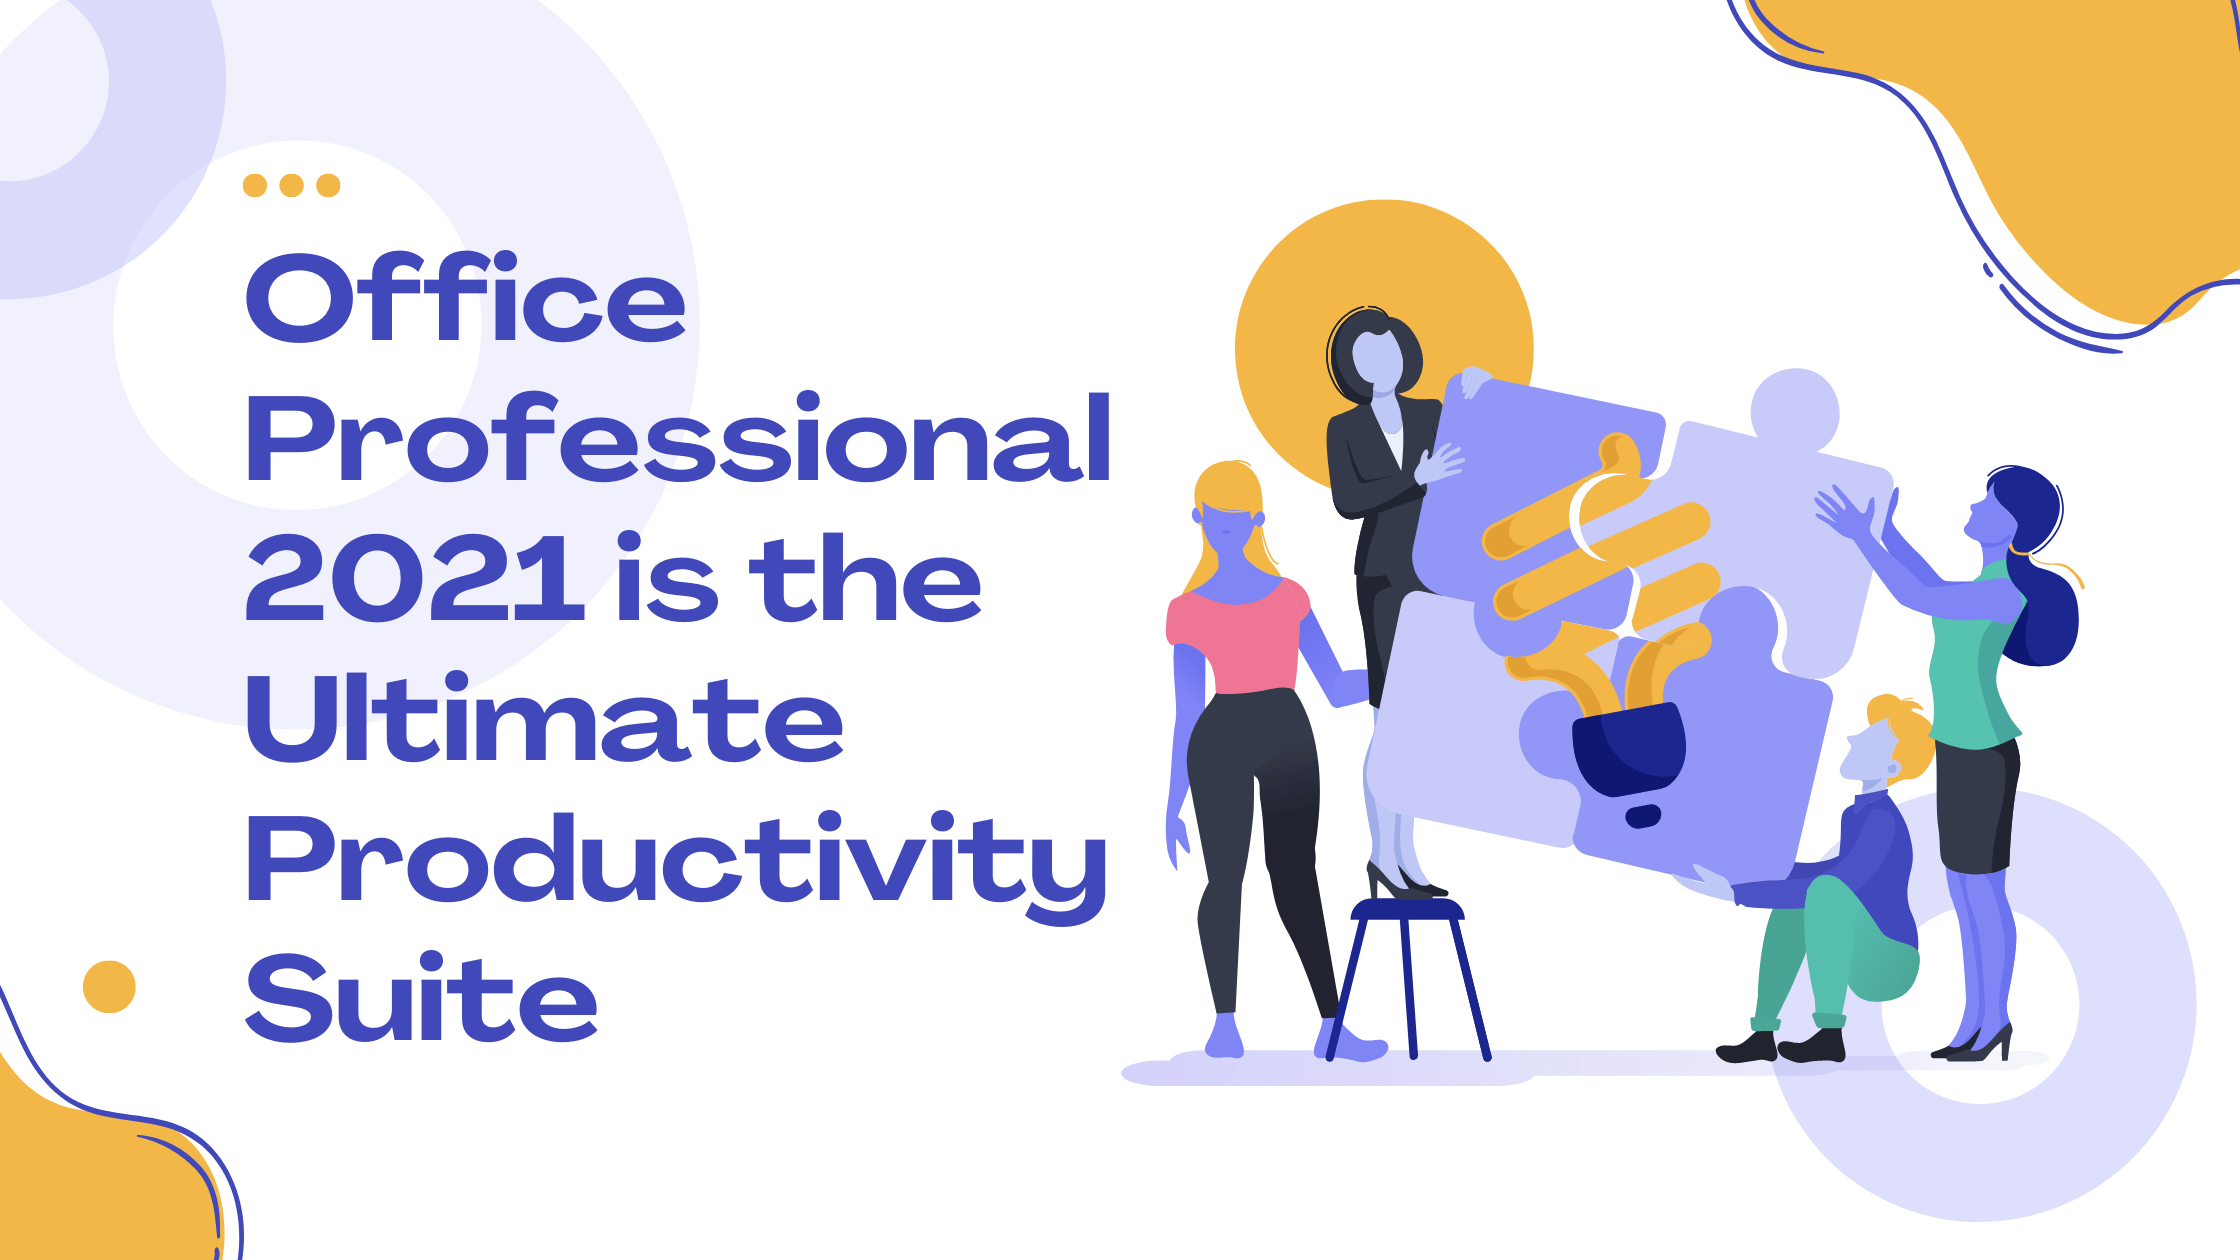 Office Professional 2021 is the Ultimate Productivity Suite